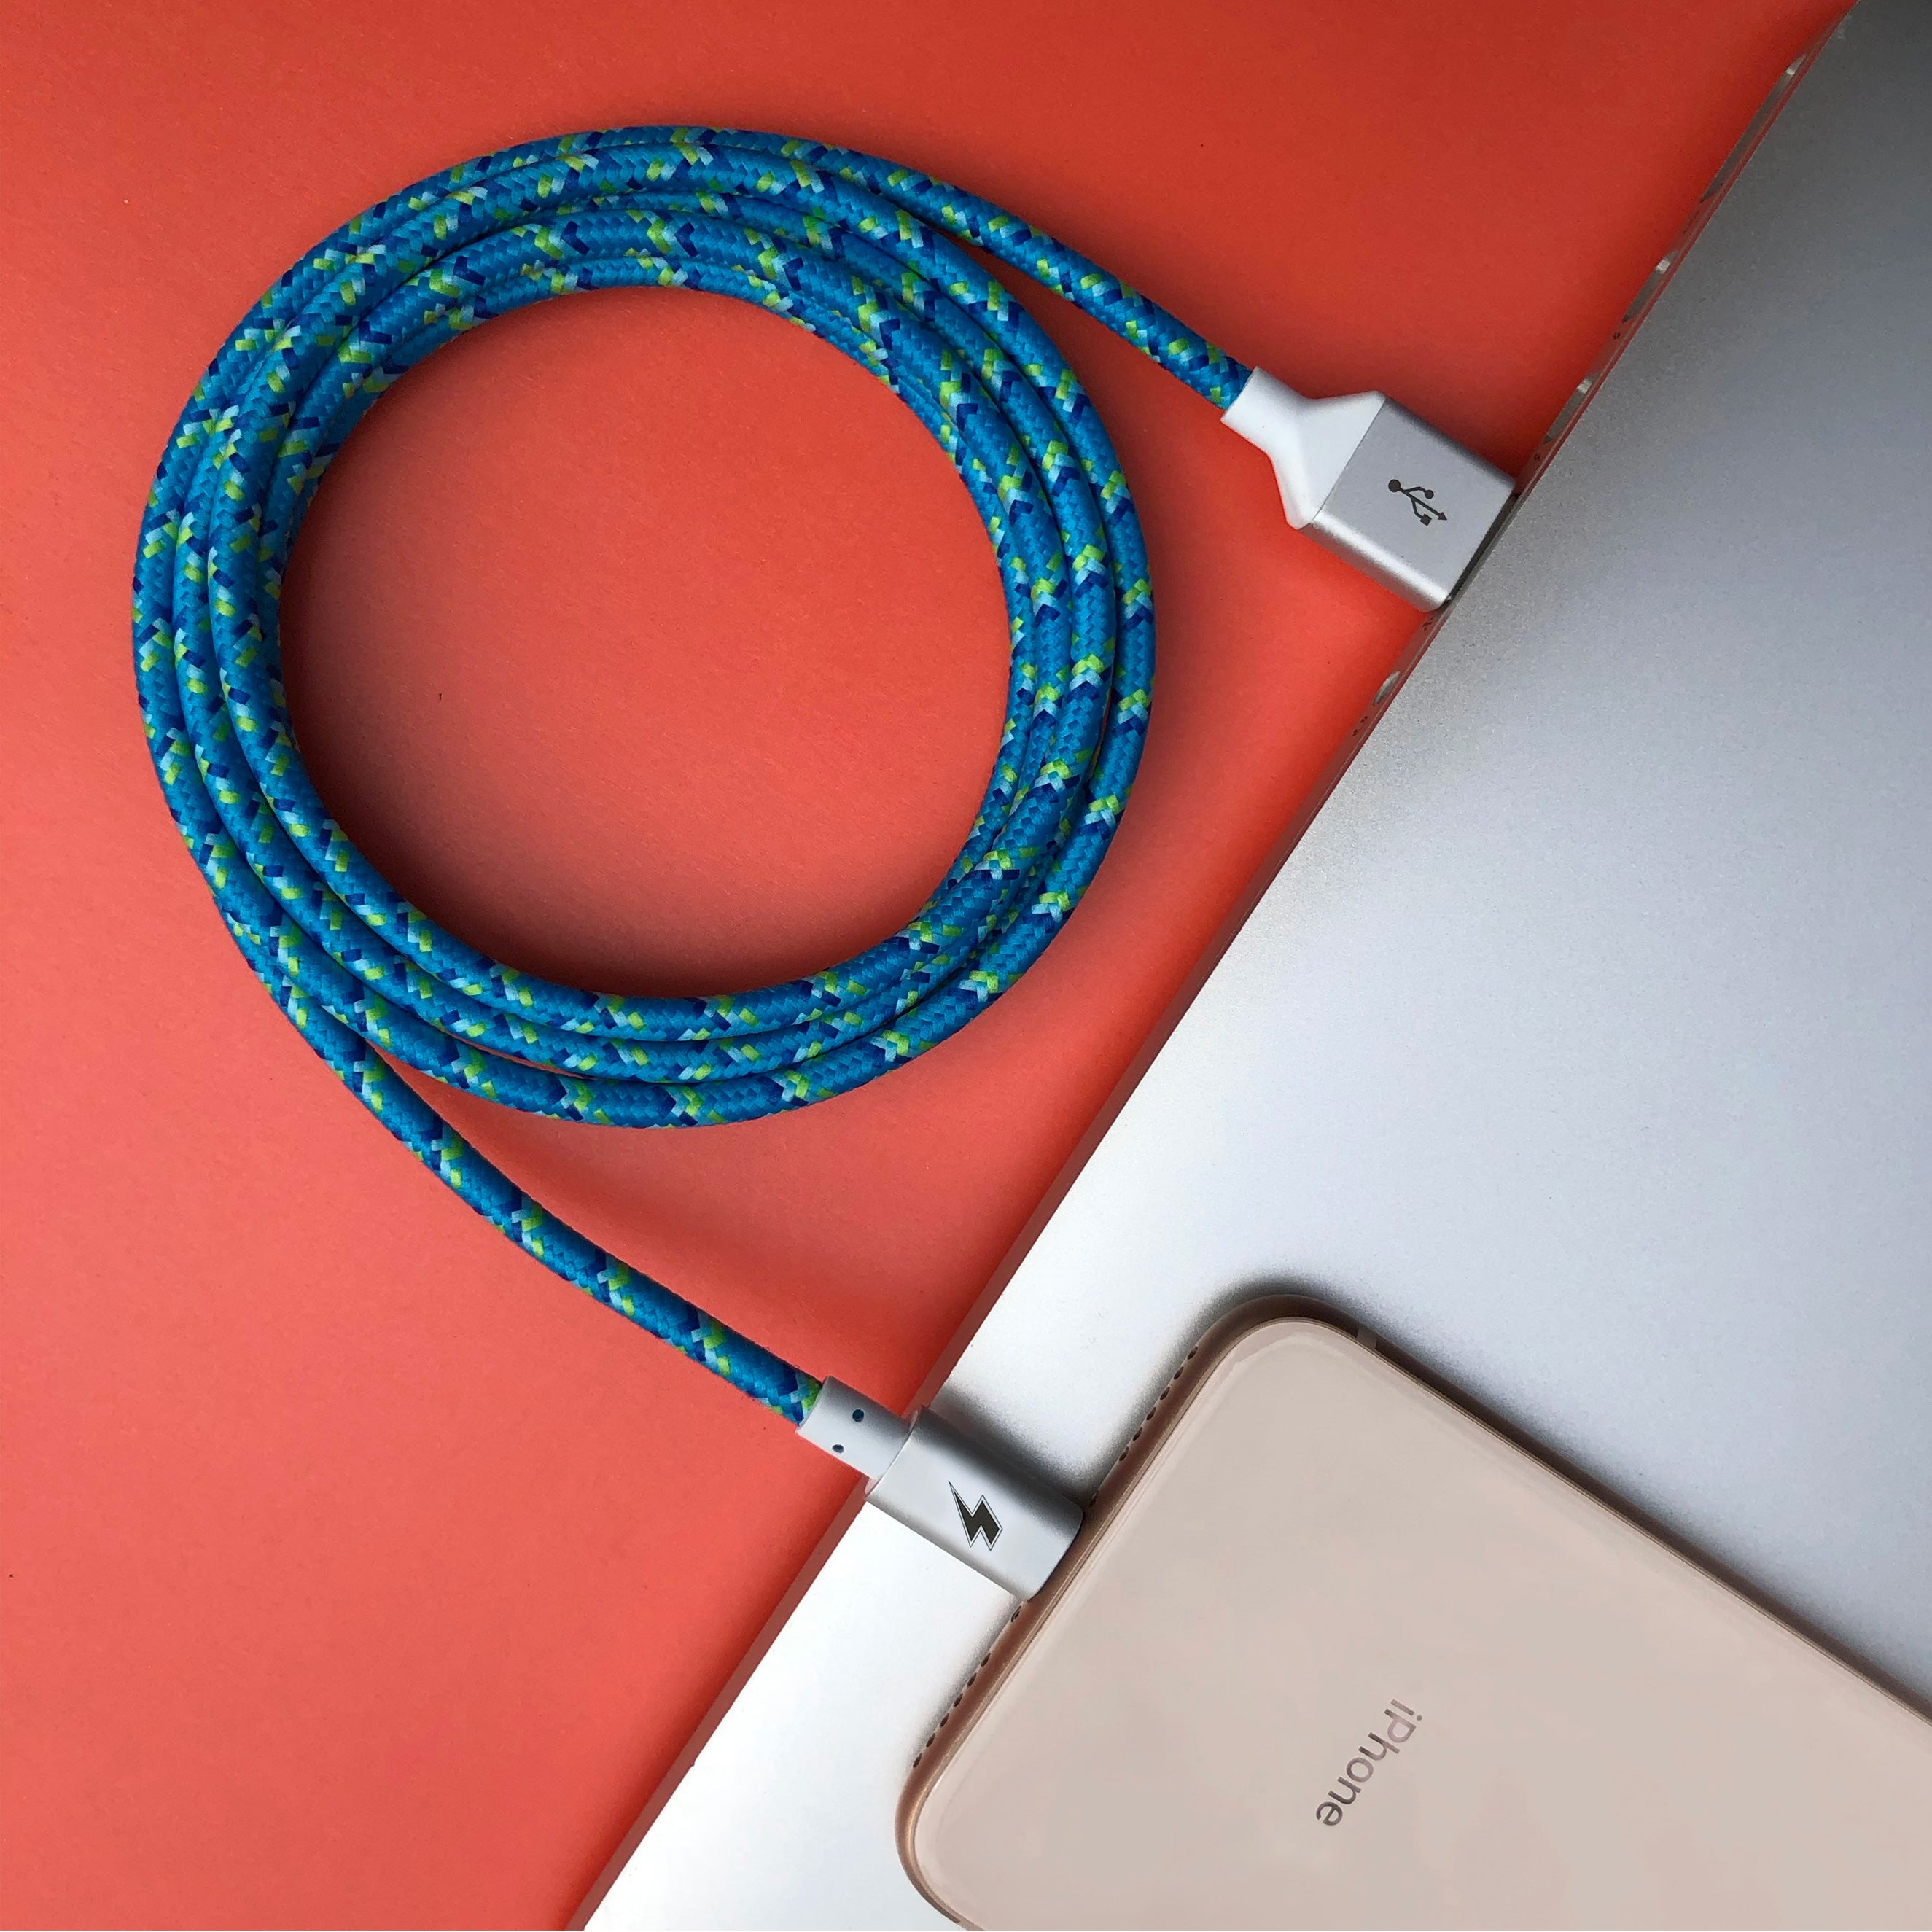 Lime Glow Lightning Cable [10 ft / 3m length] – Charge Cords